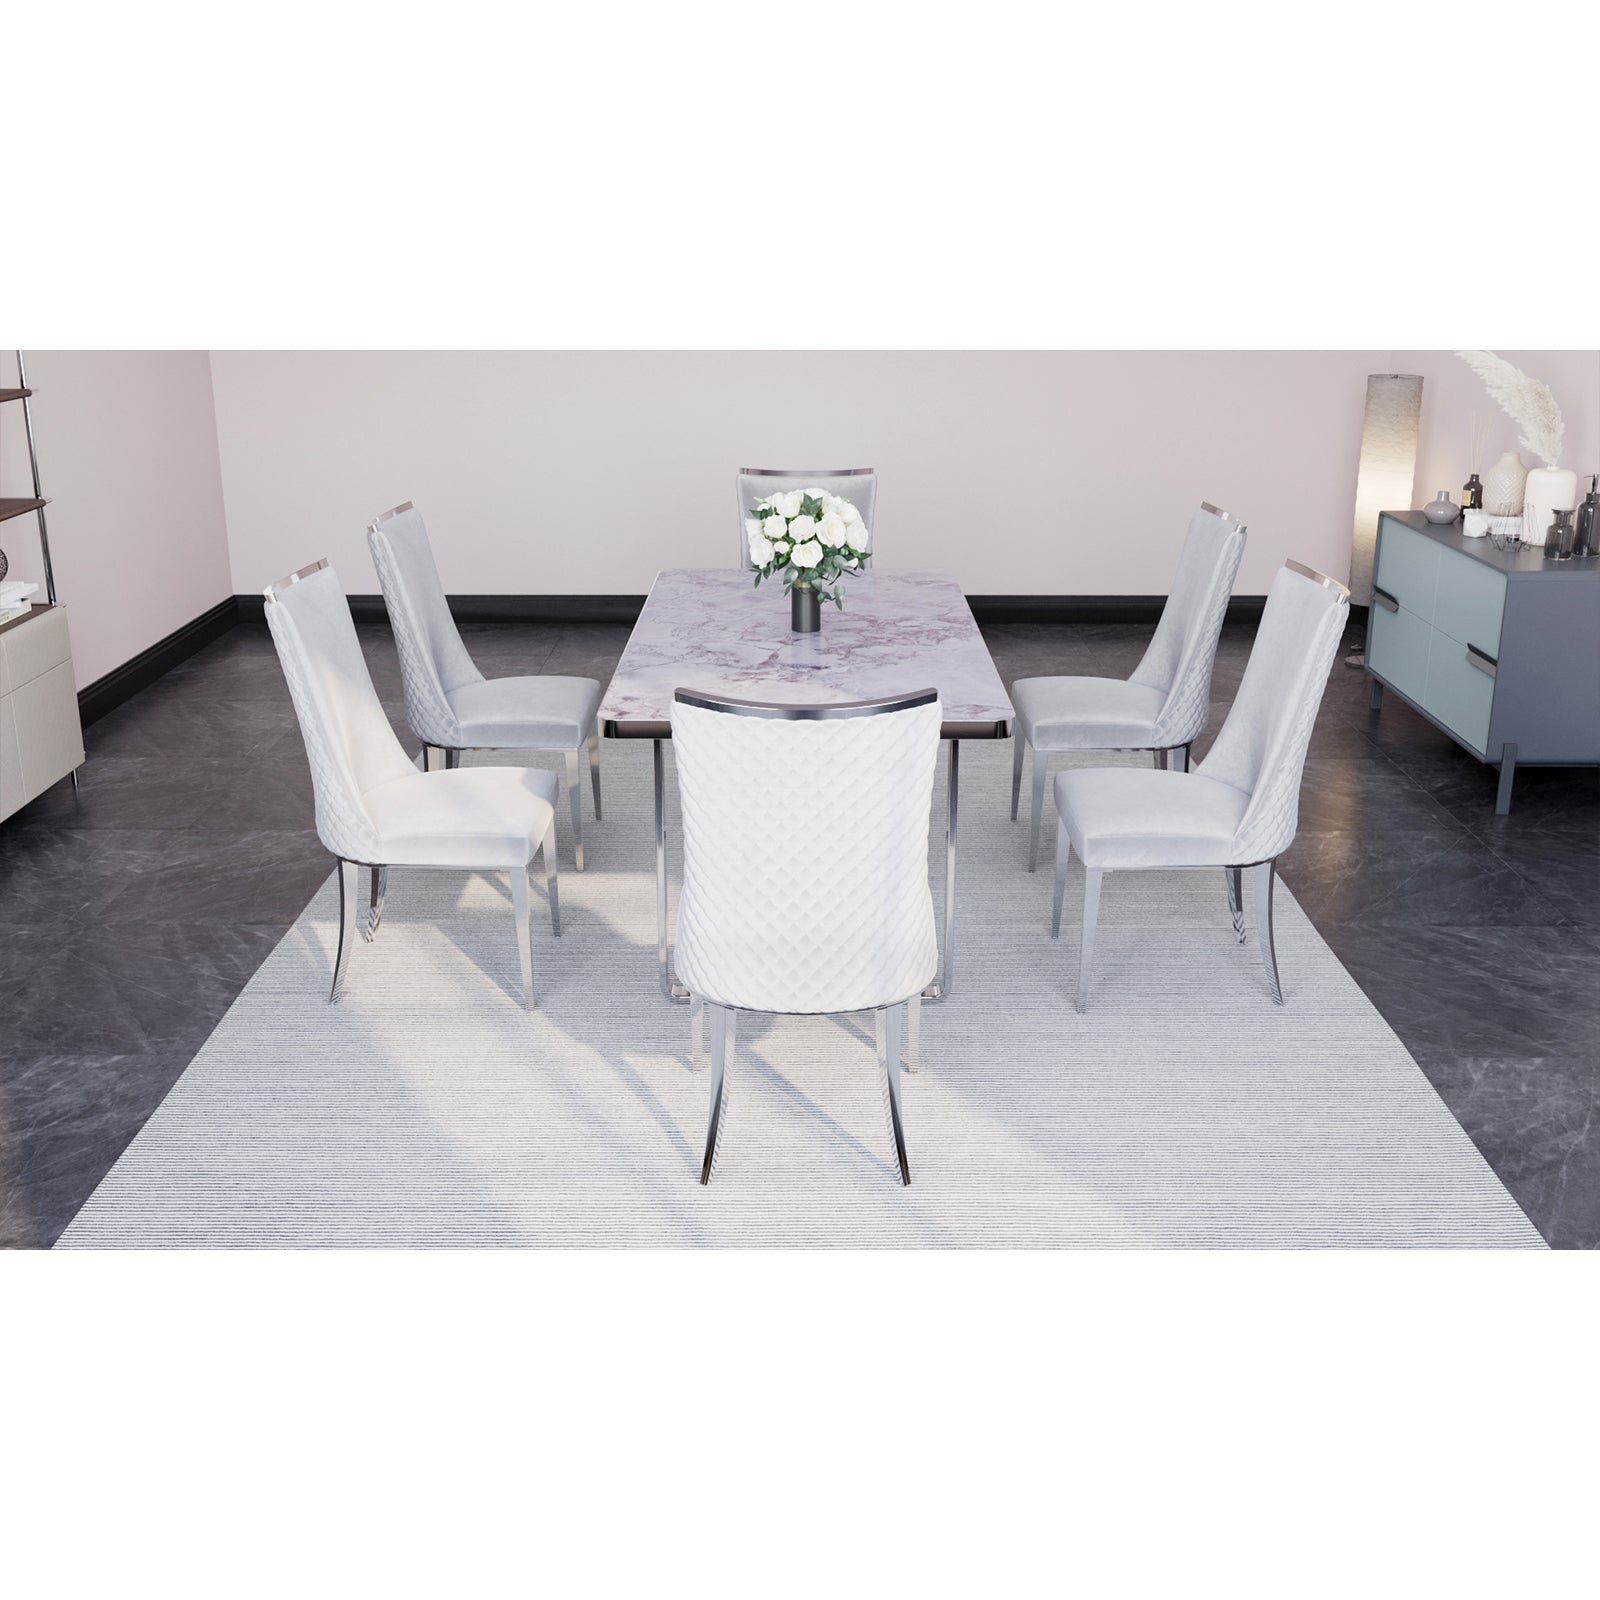 701 Set | AUZ White and Silver Dining room Sets for 6